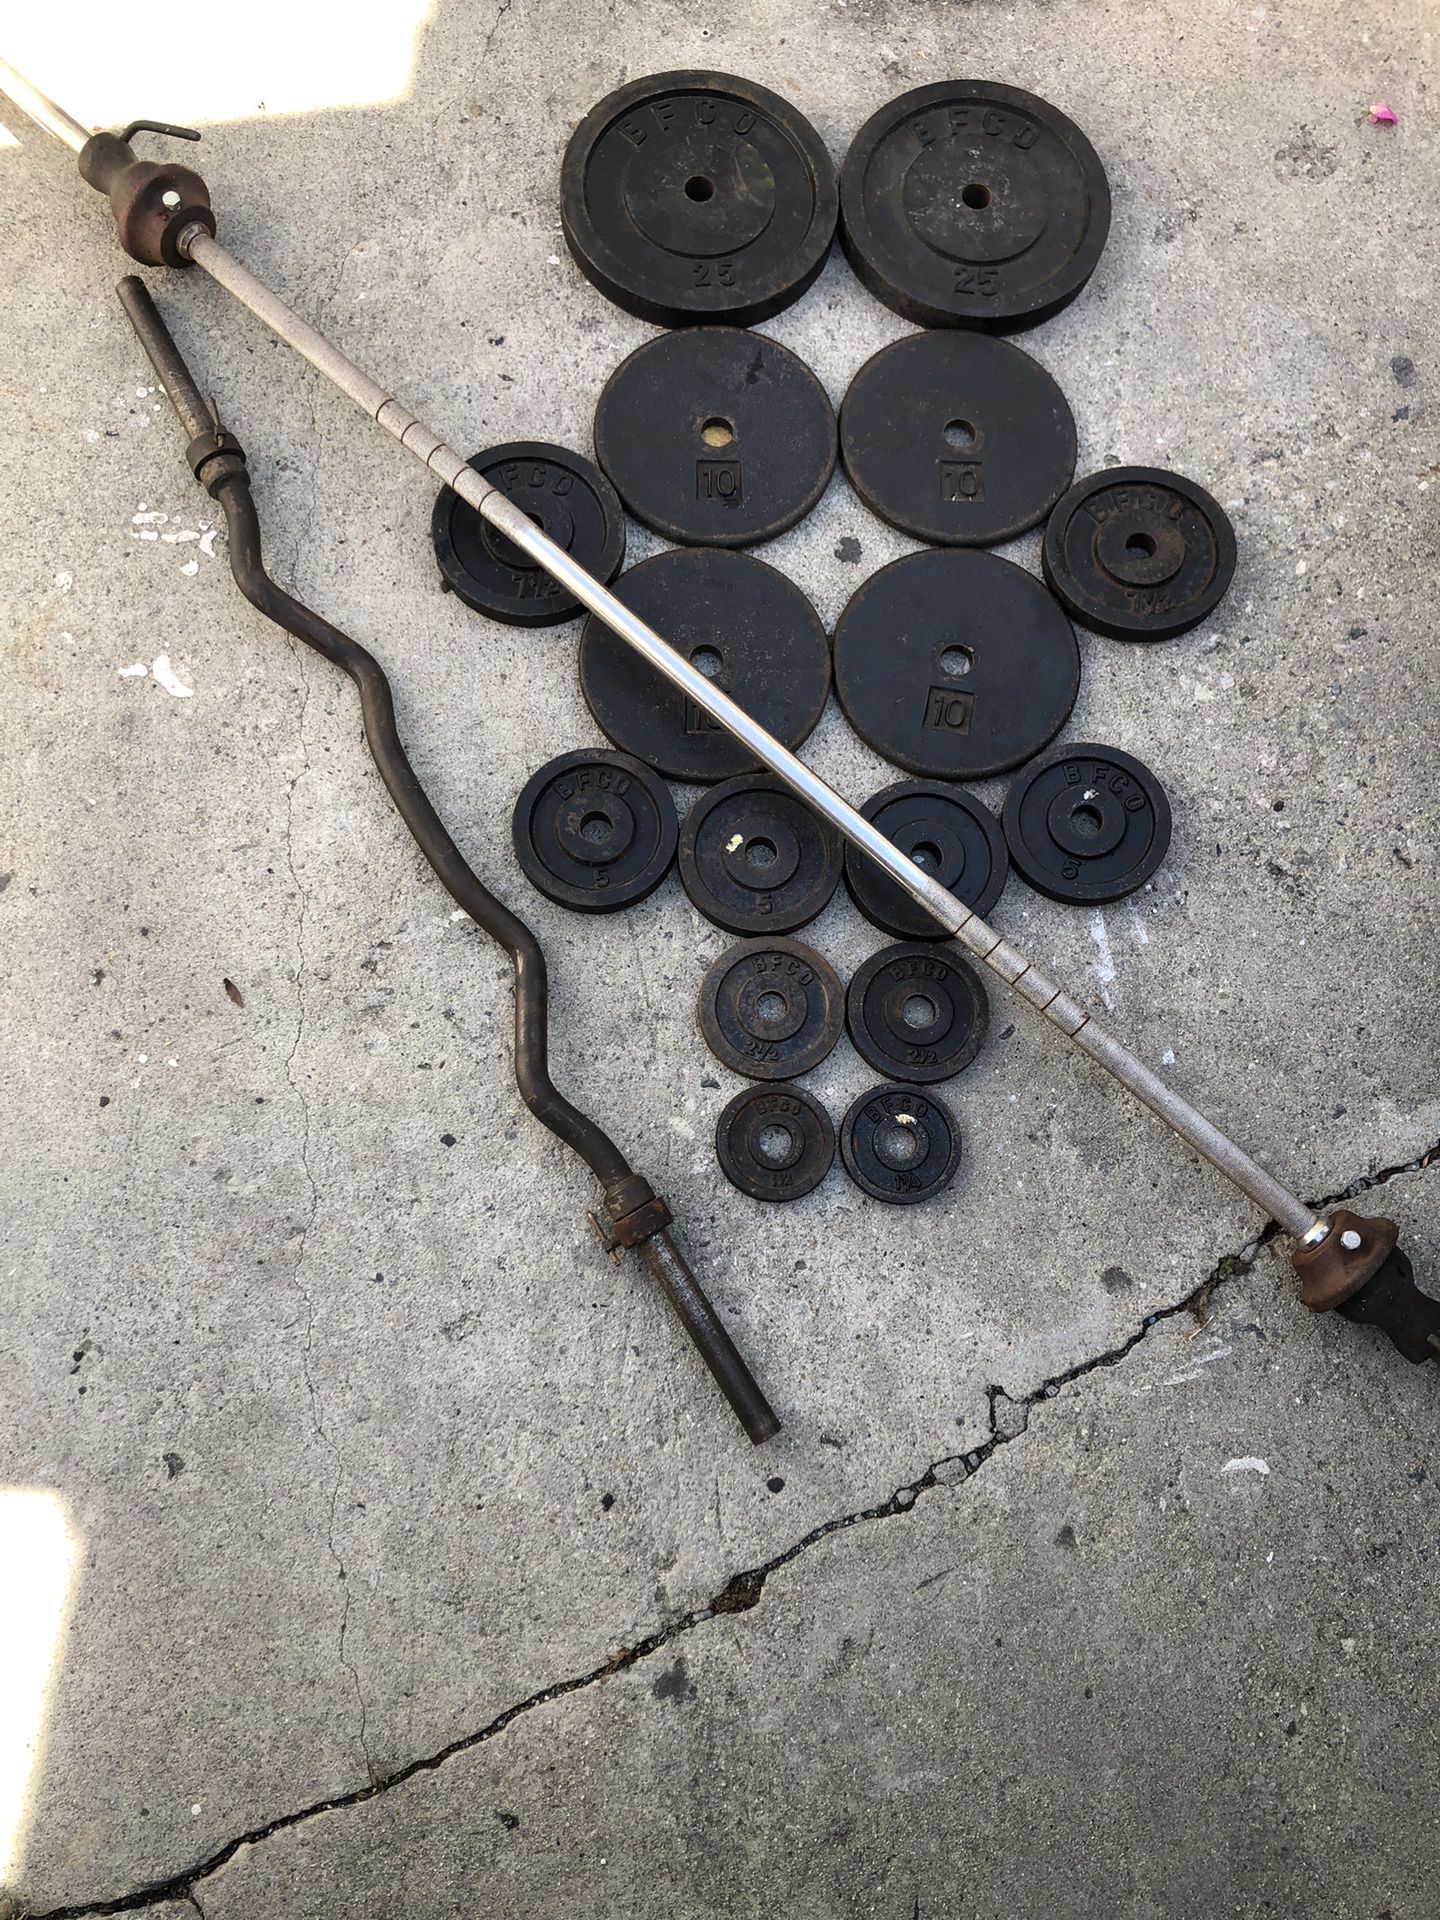 Standard Weights With Straight Bar and Curl Bar. Selling all together for $100 firm